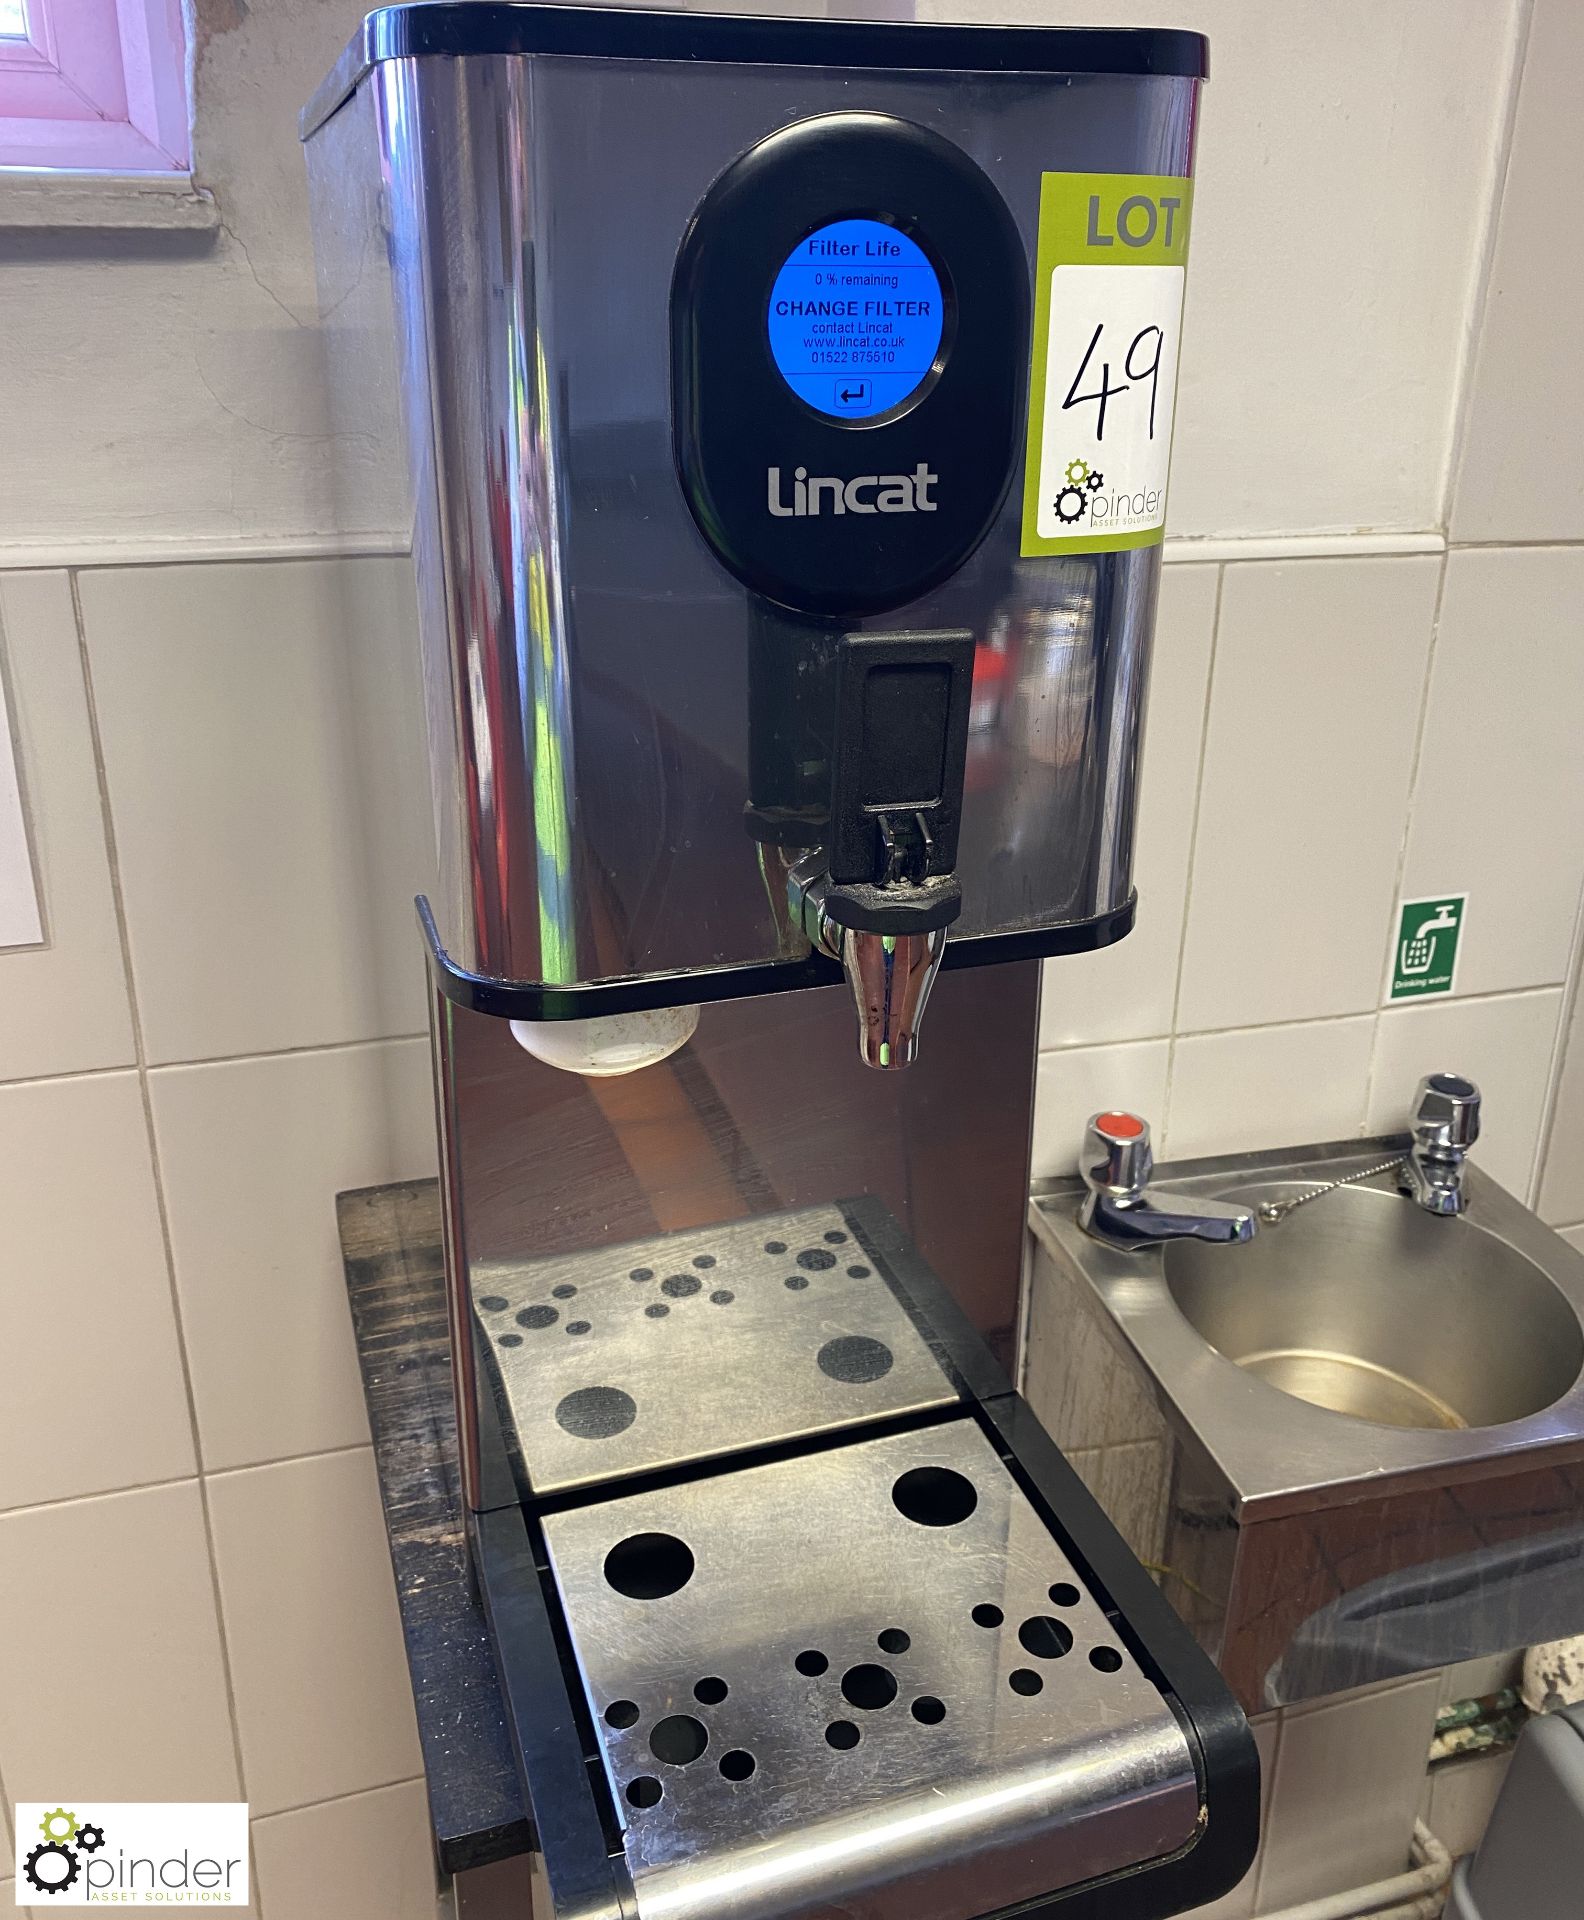 Lincat Water Boiler and stand